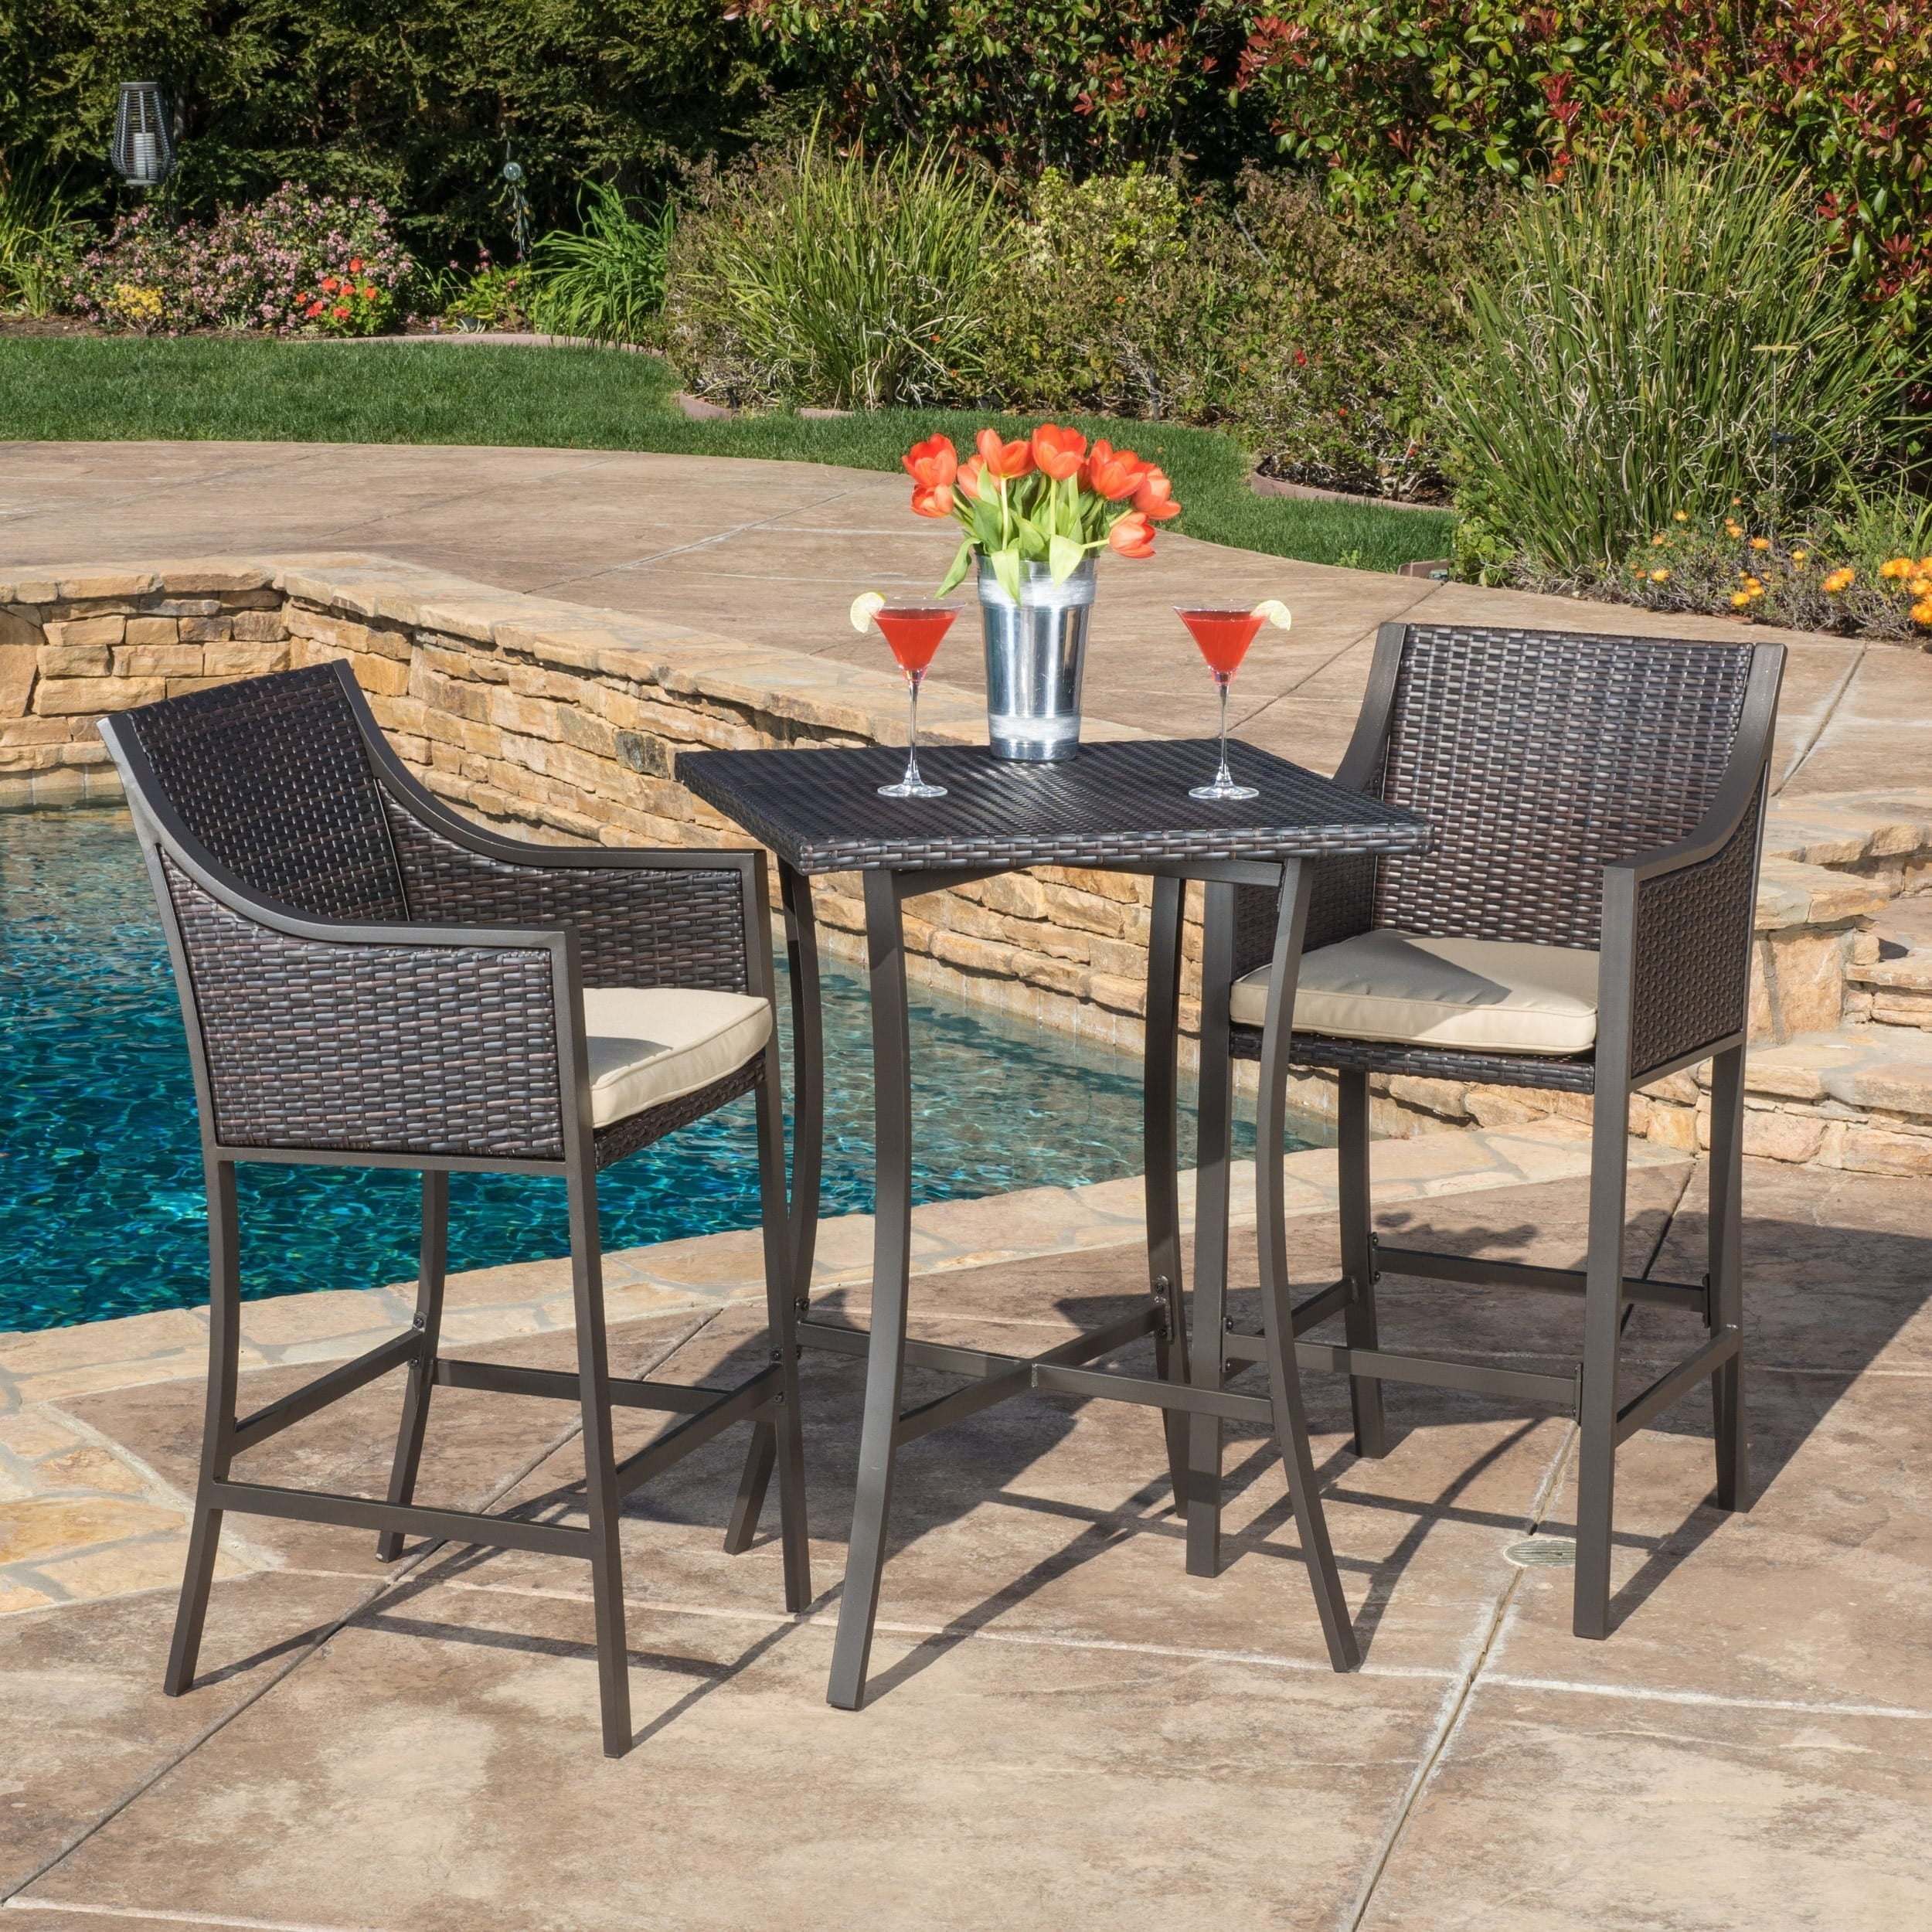 Christopher Knight Home Riga Outdoor 3-piece Wicker Bistro Bar Set with